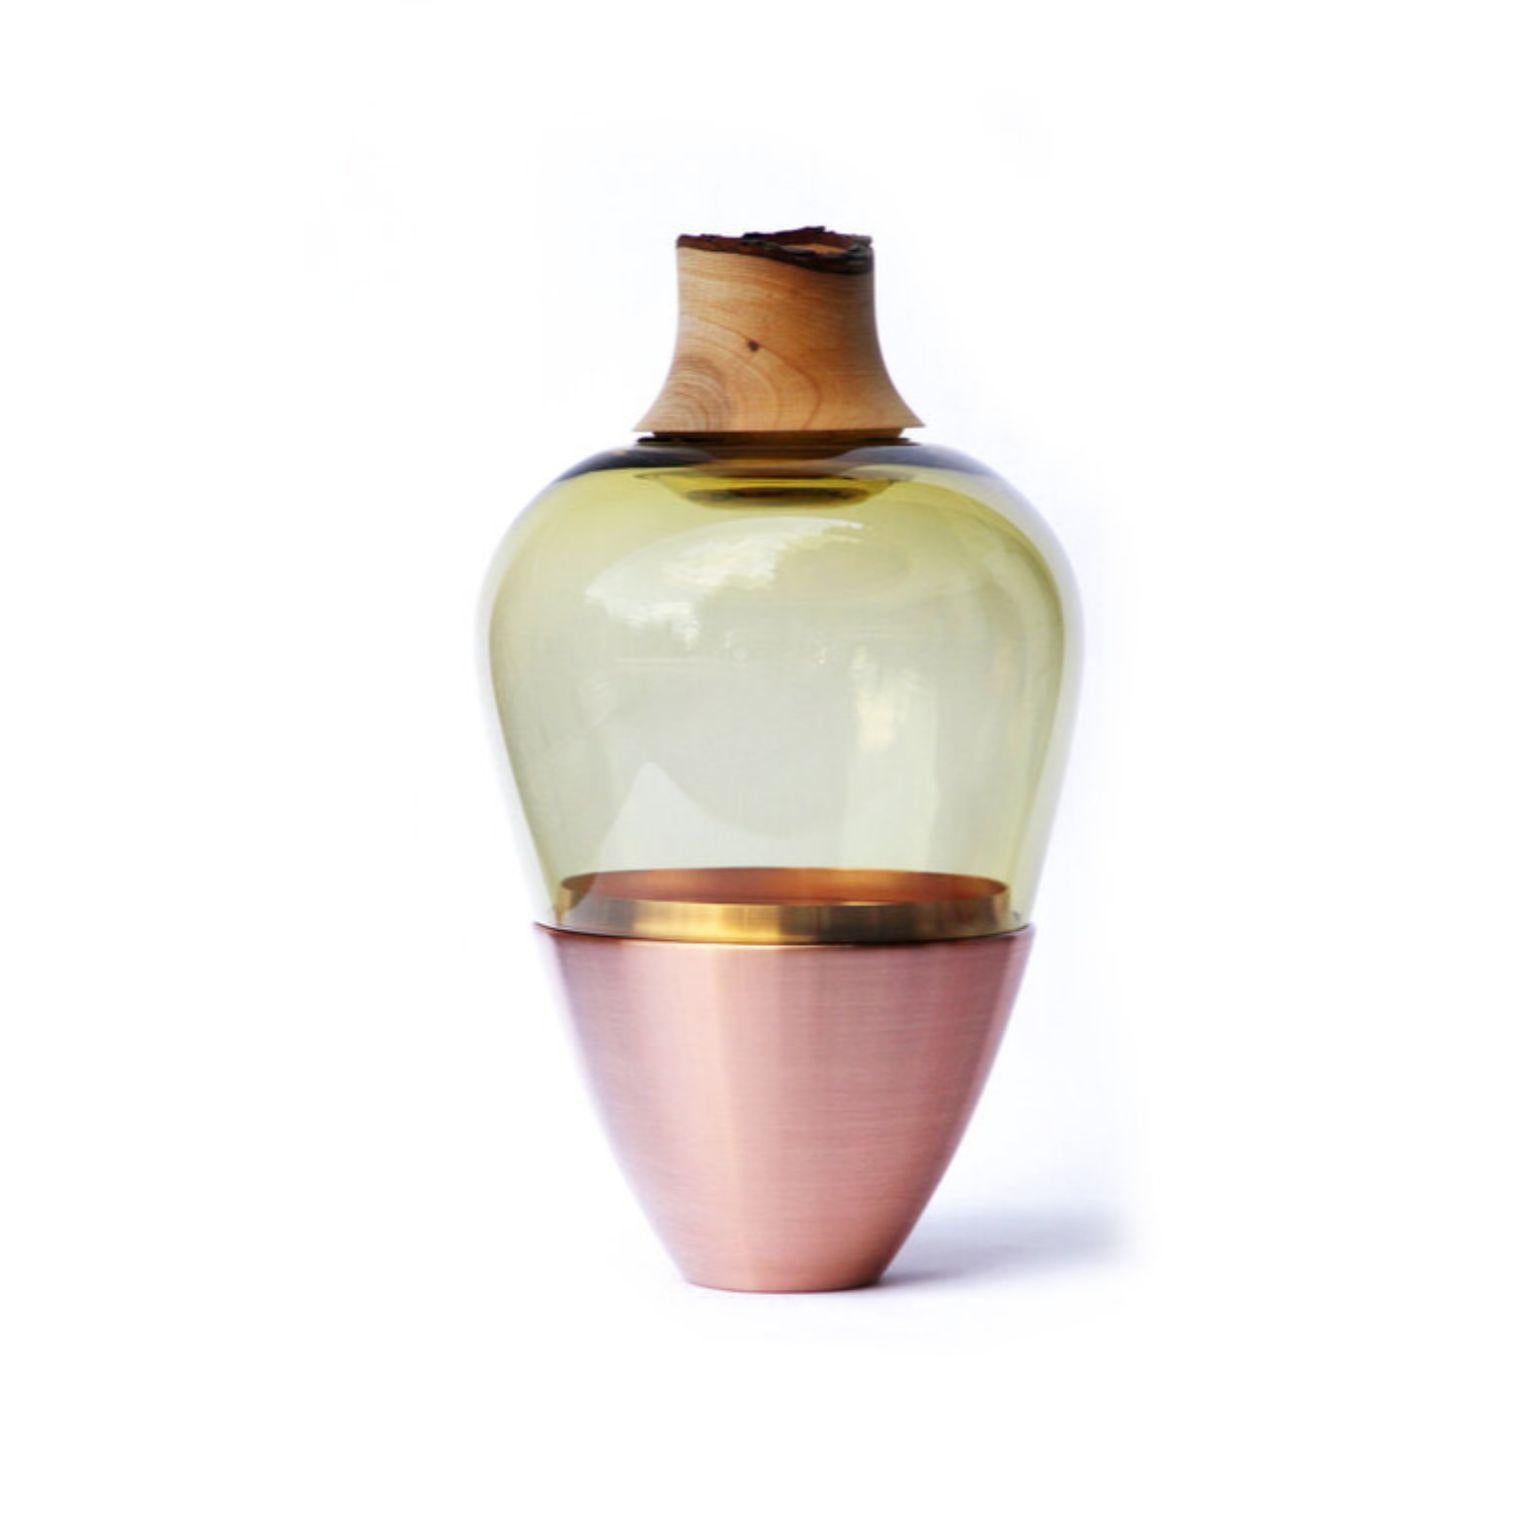 Olive and Copper India I Stacking Vessel , Pia Wüstenberg
Dimensions: Height 20 x diameter 38 cm.
Materials: hand blown glass, copper.

Pia Wüstenberg, Utopia
Pia Wüstenberg is a creative with a passion for materials and craft. She graduated from